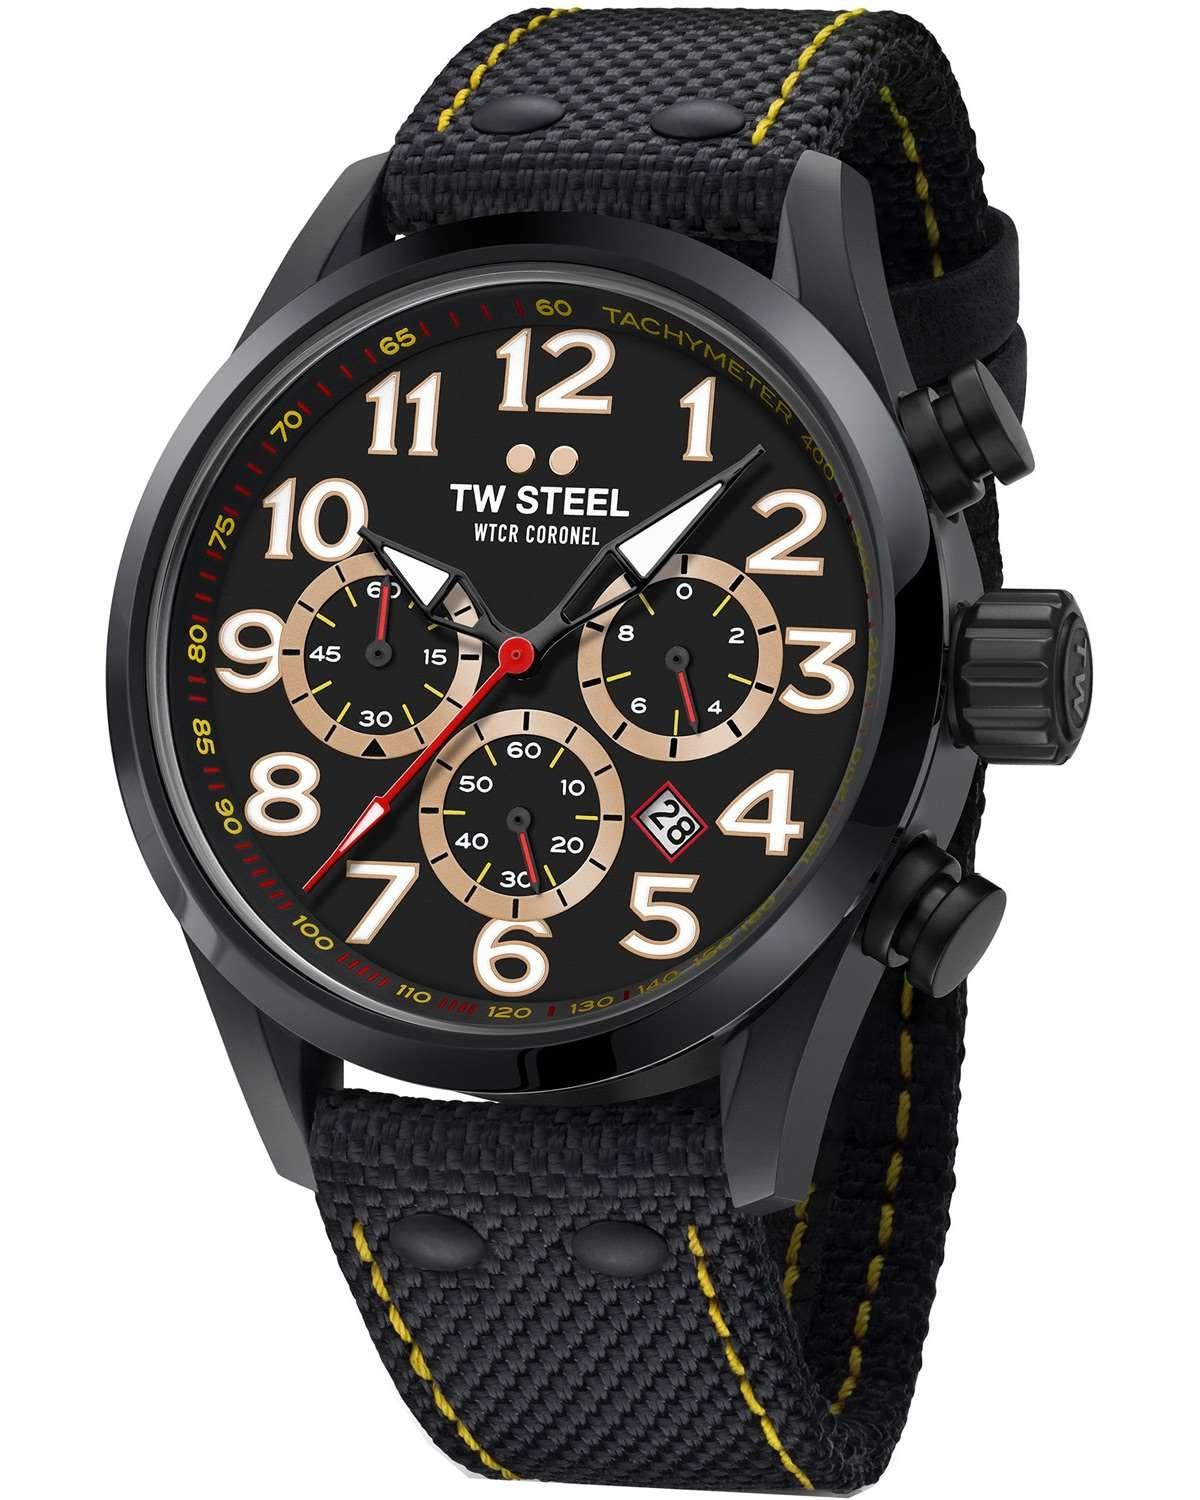 TW STEEL WTCR Coronel Special Edition Chronograph